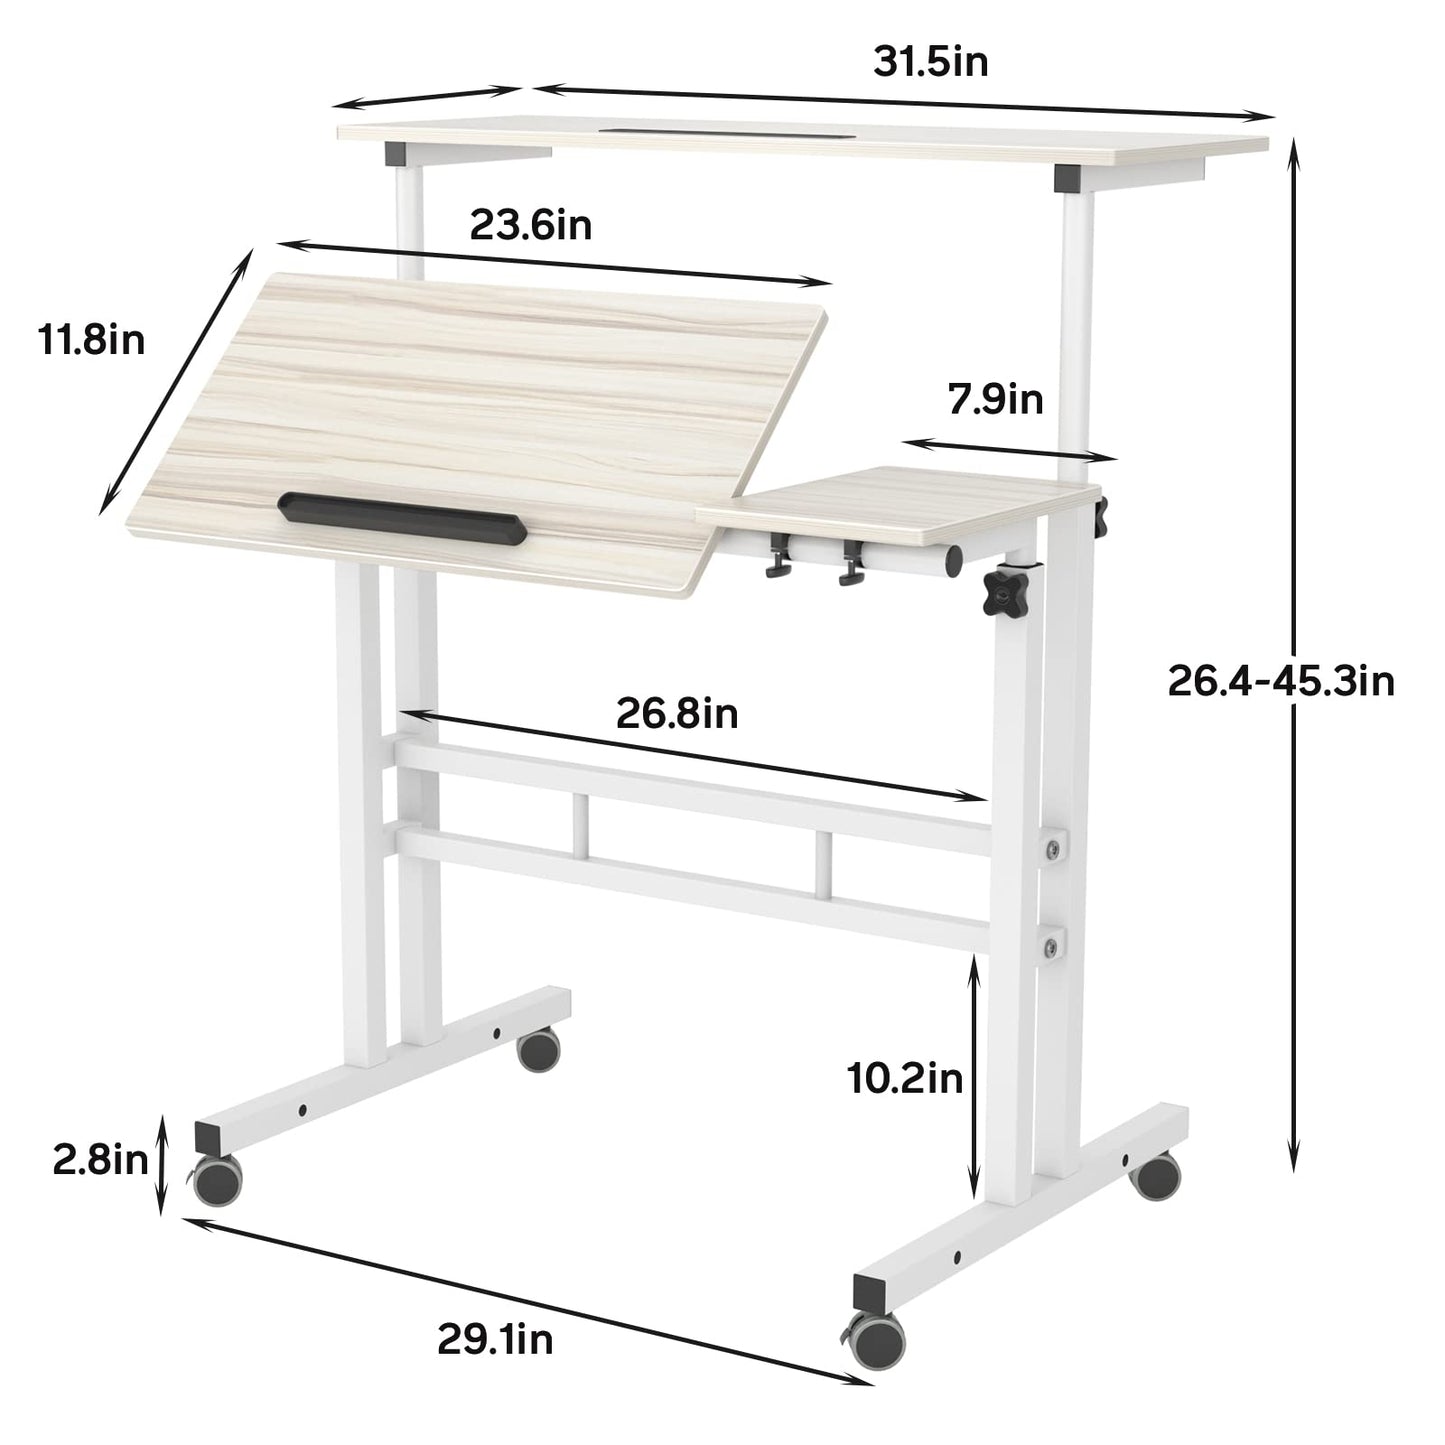 sogesfurniture Height Adjustable Sit Stand Workstation Mobile Standing Desk Home Office Desk with Standing and Seating,Maple BHUS-101-2MP